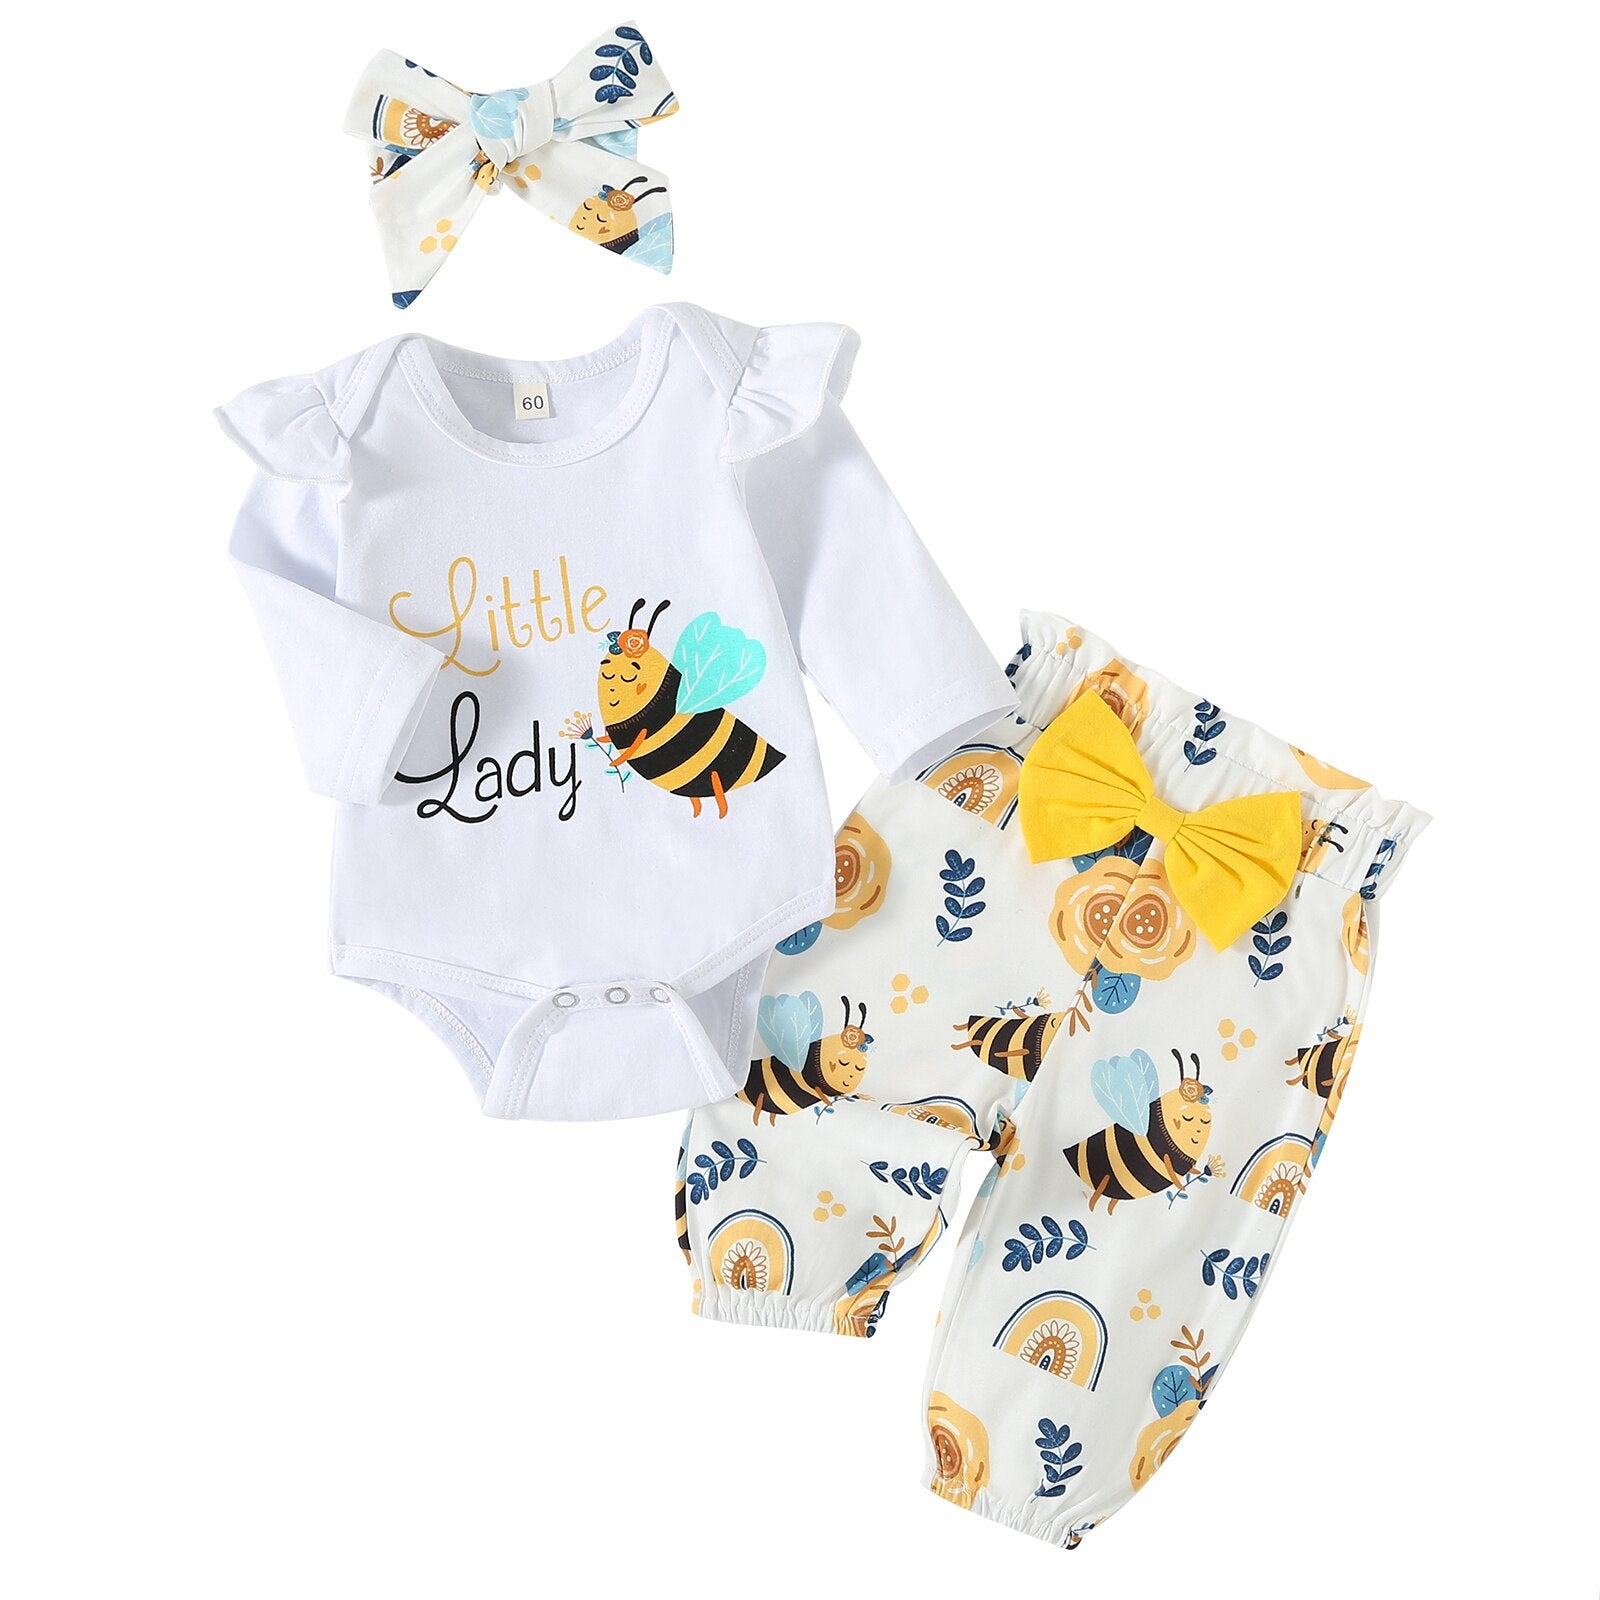 Adorable Insect Print Baby Girl Clothing Set with Ruffles and Bow